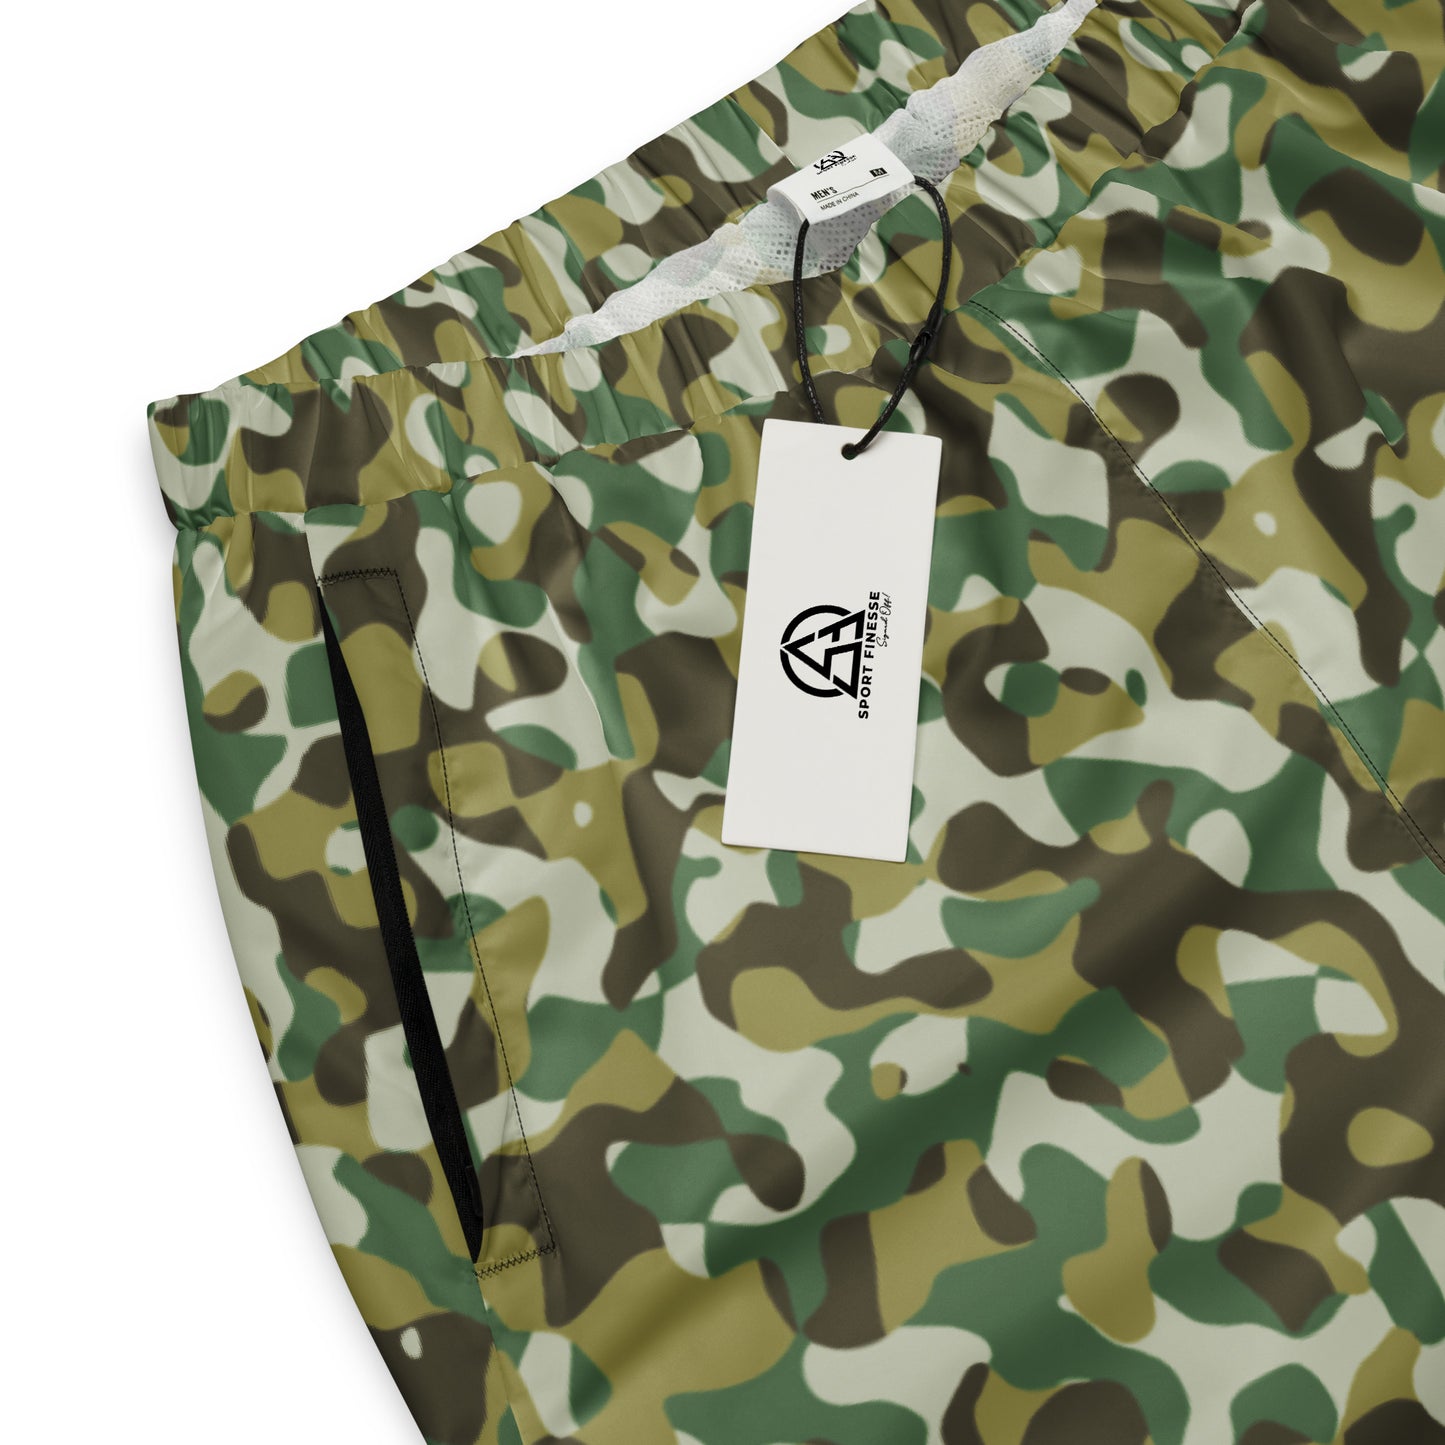 Camouflage Print track pants - Sport Finesse